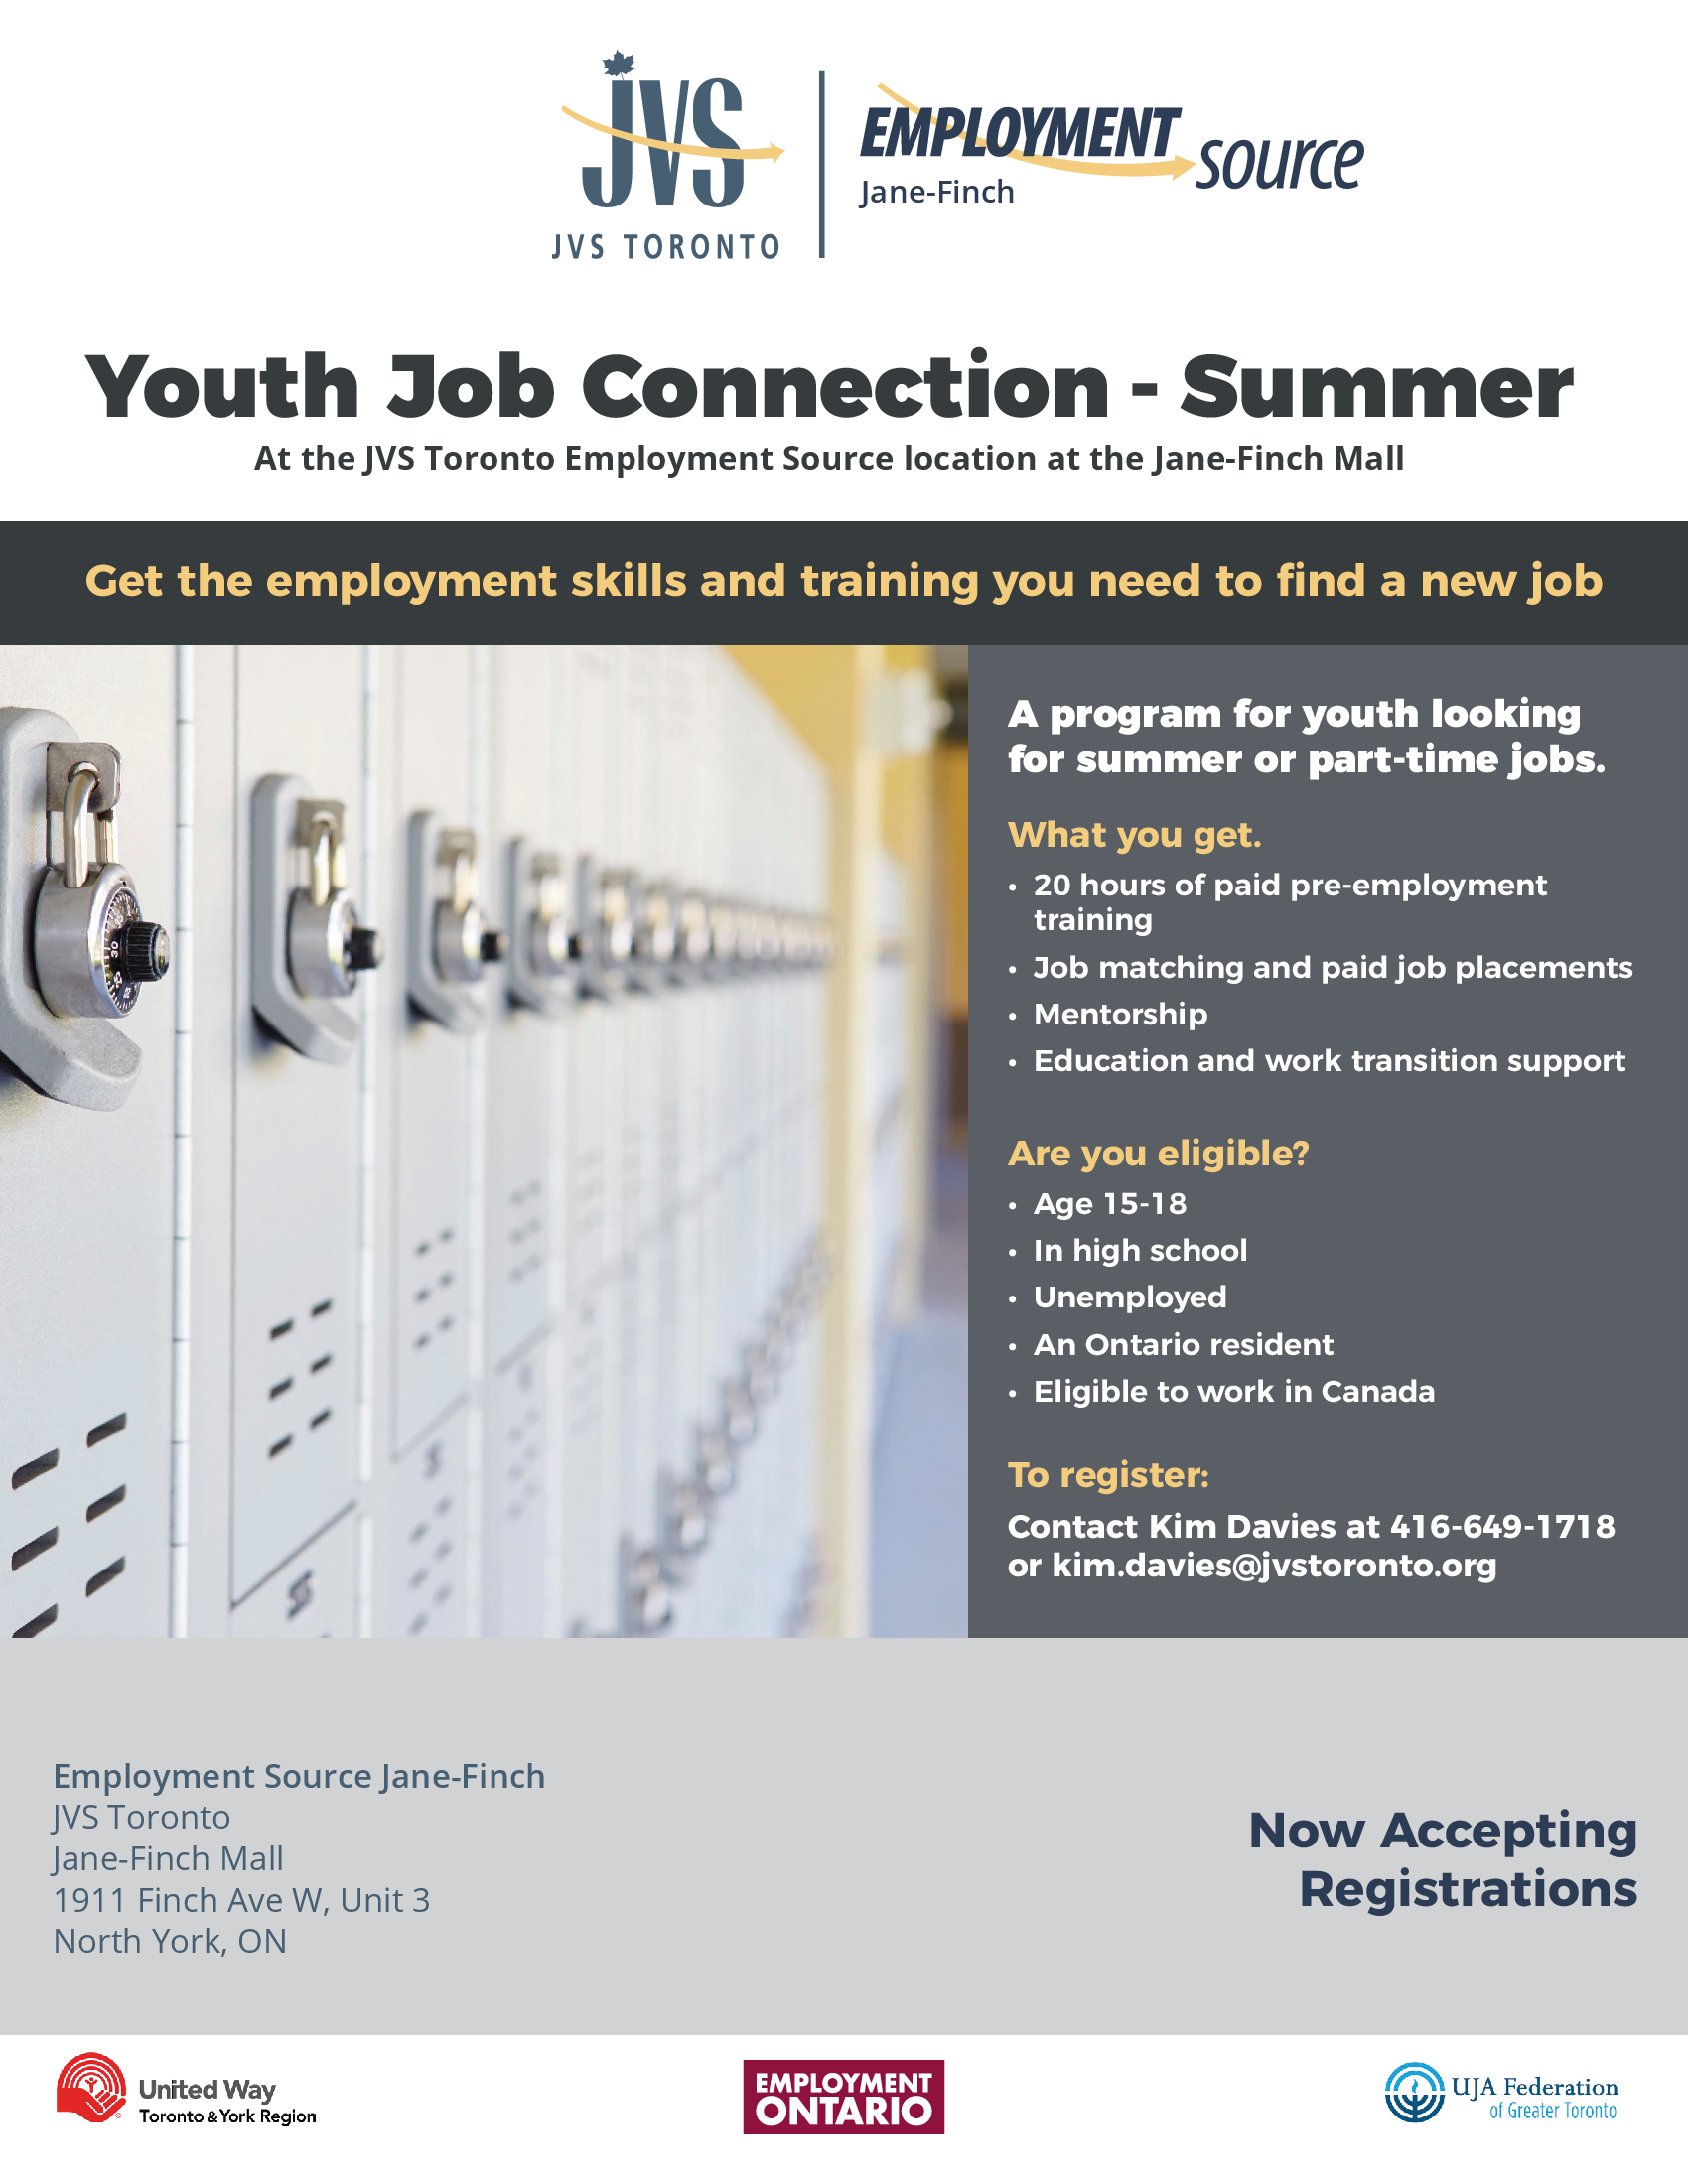 Youth-Job-Connection-Summer-Flyer